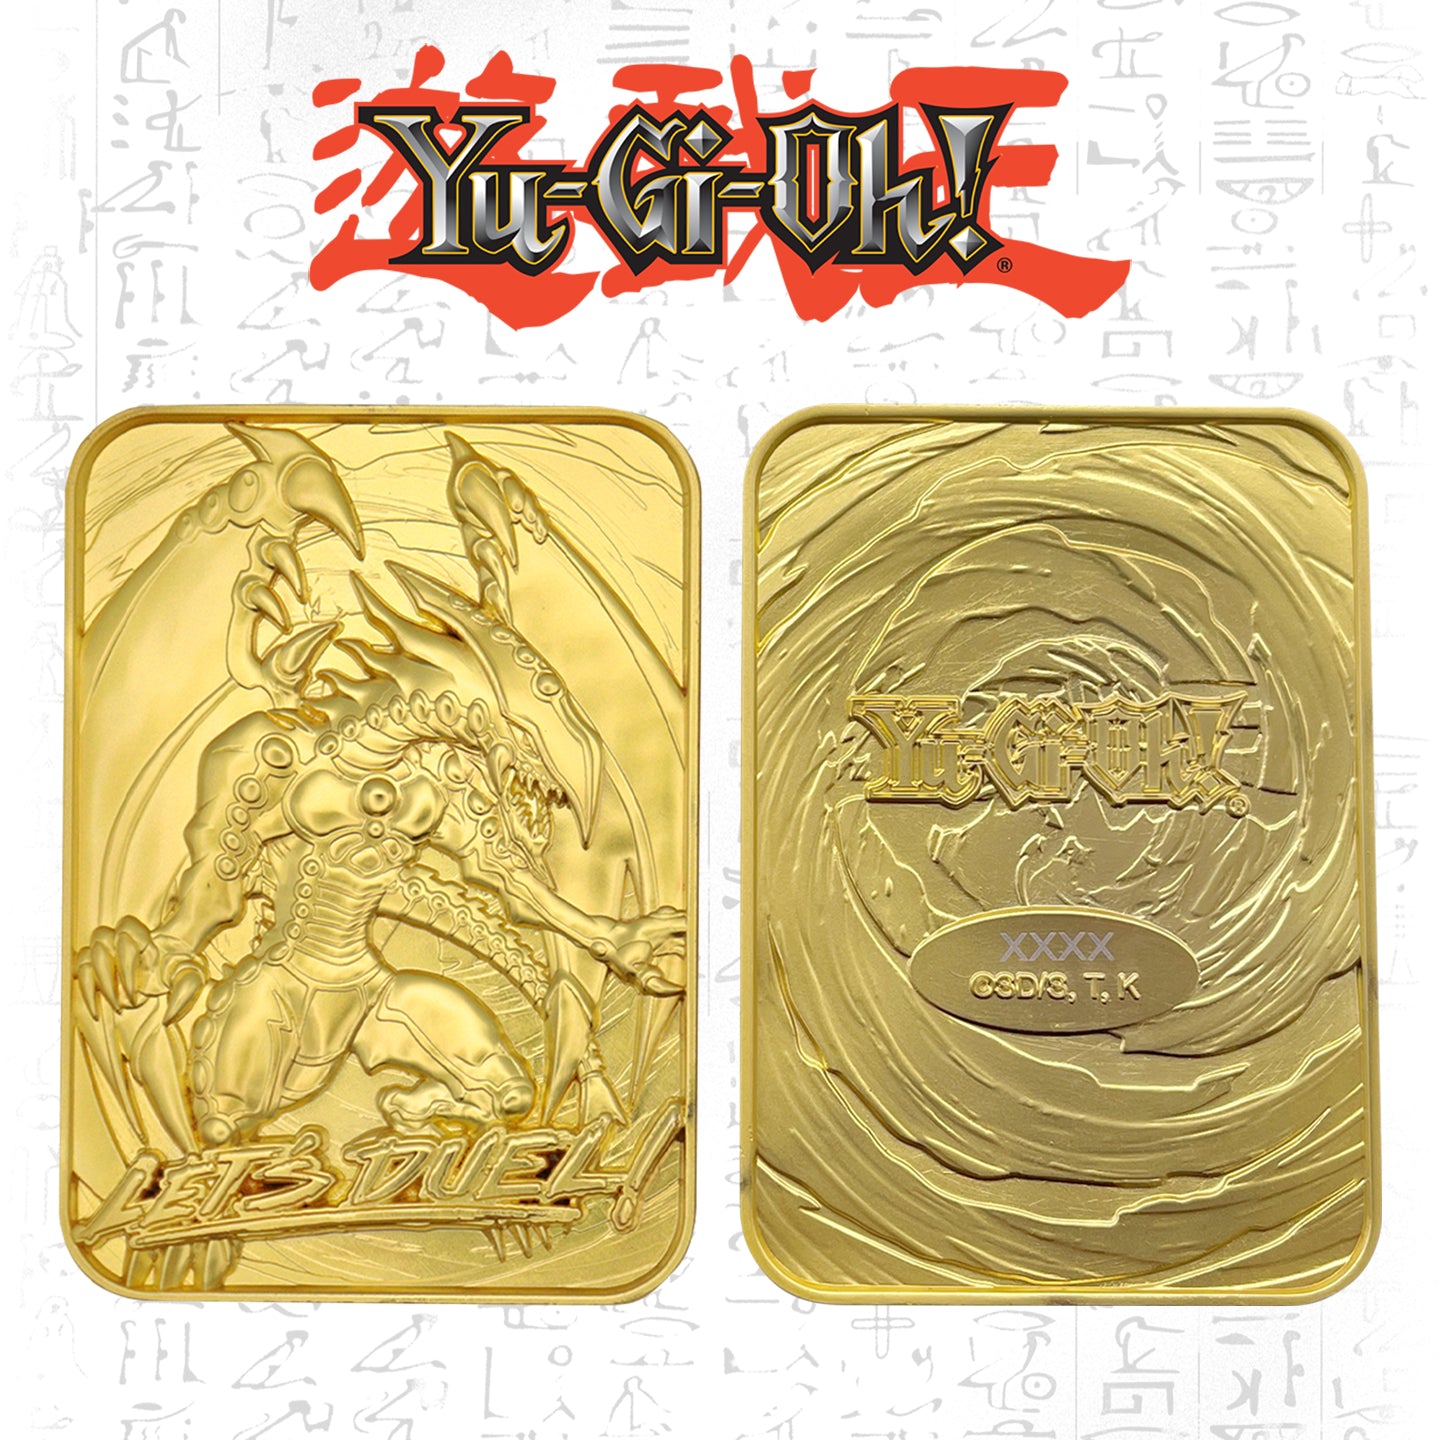 Yu-Gi-Oh! Limited Edition 24k Gold Plated Gandra the Dragon of Destruction Metal Card